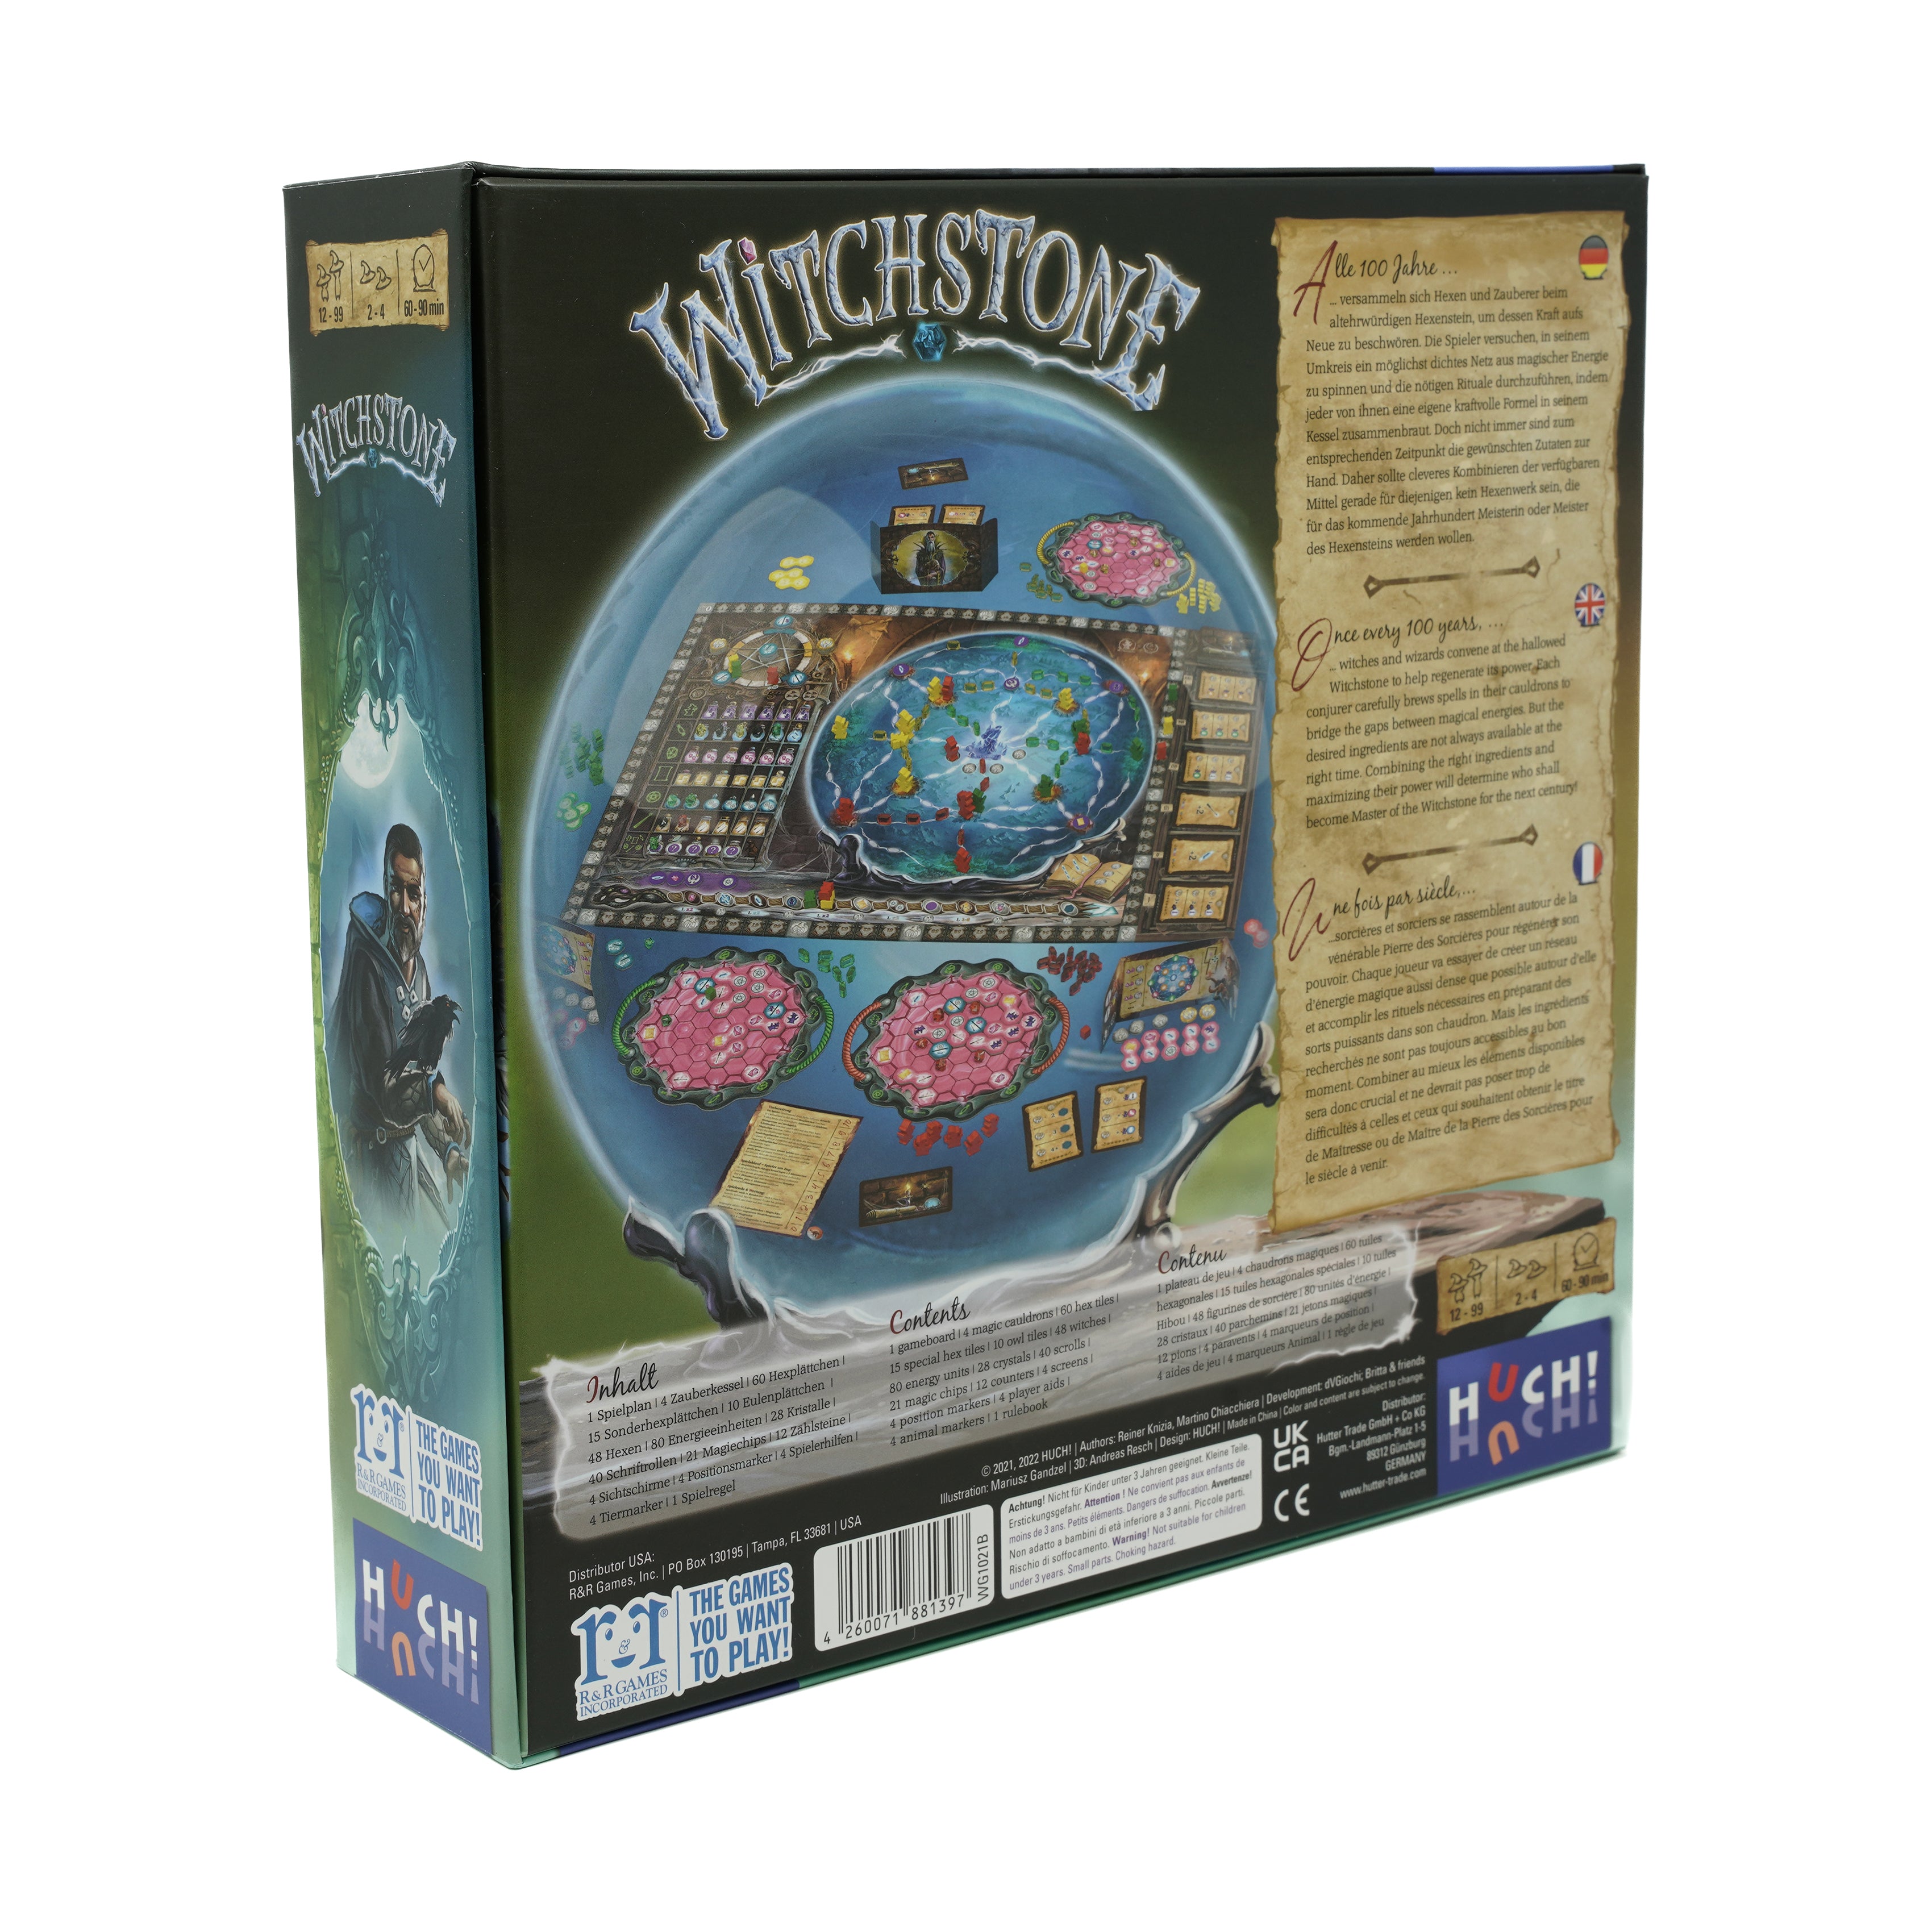 Witchstone | Strategy Games | AreYouGame – AreYouGame.com